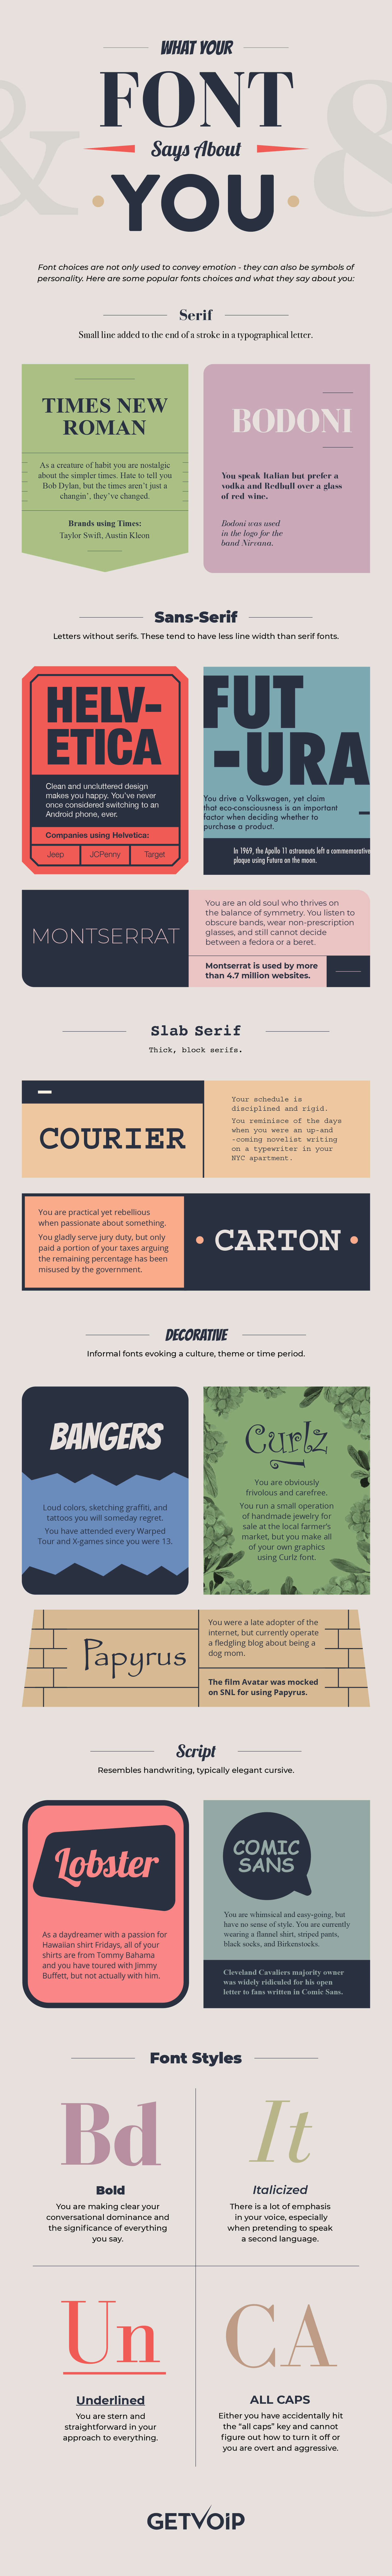 What Your Font Choices Say About You